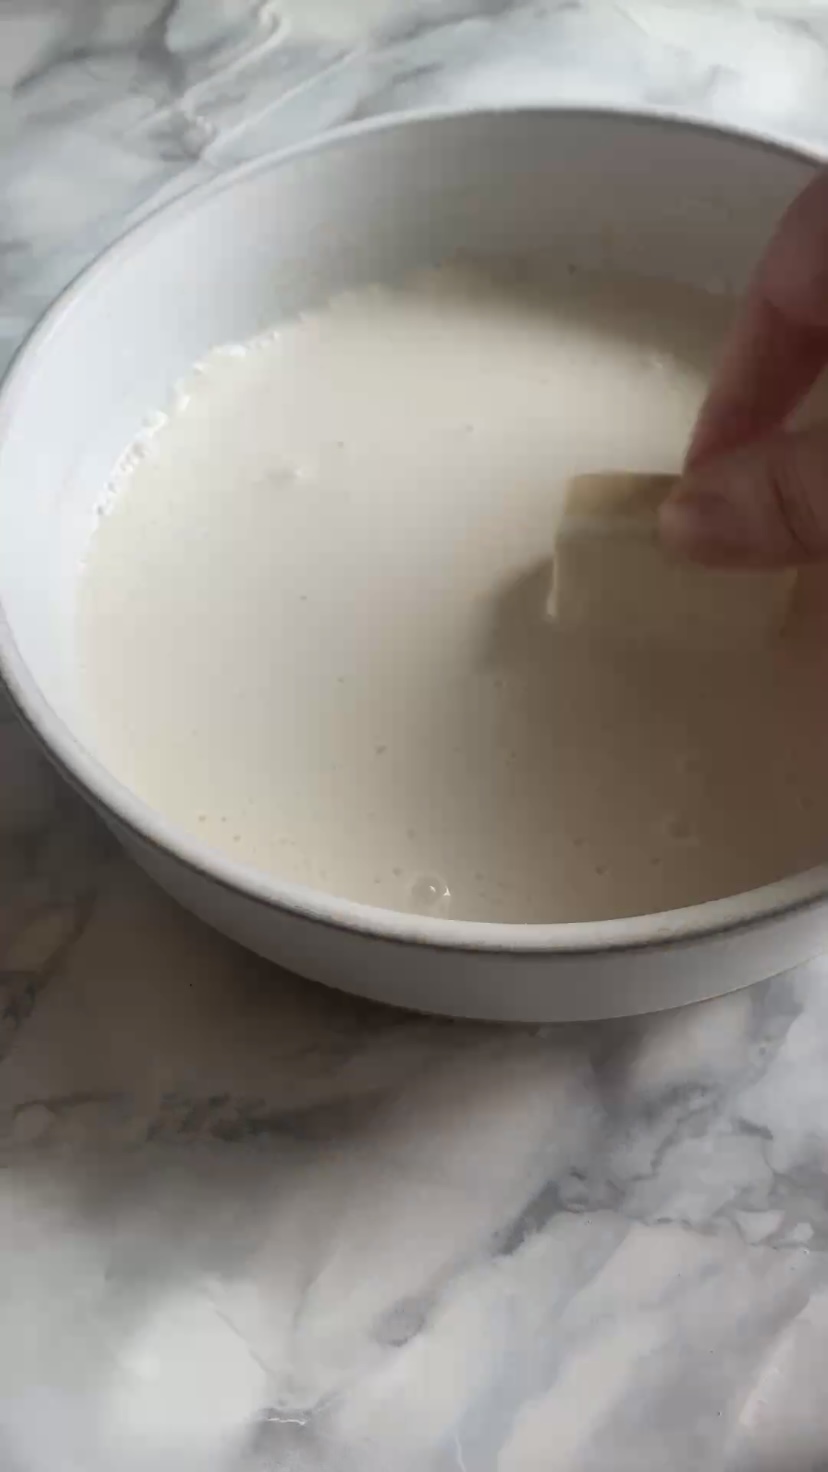 Coating the tofu in the batter.